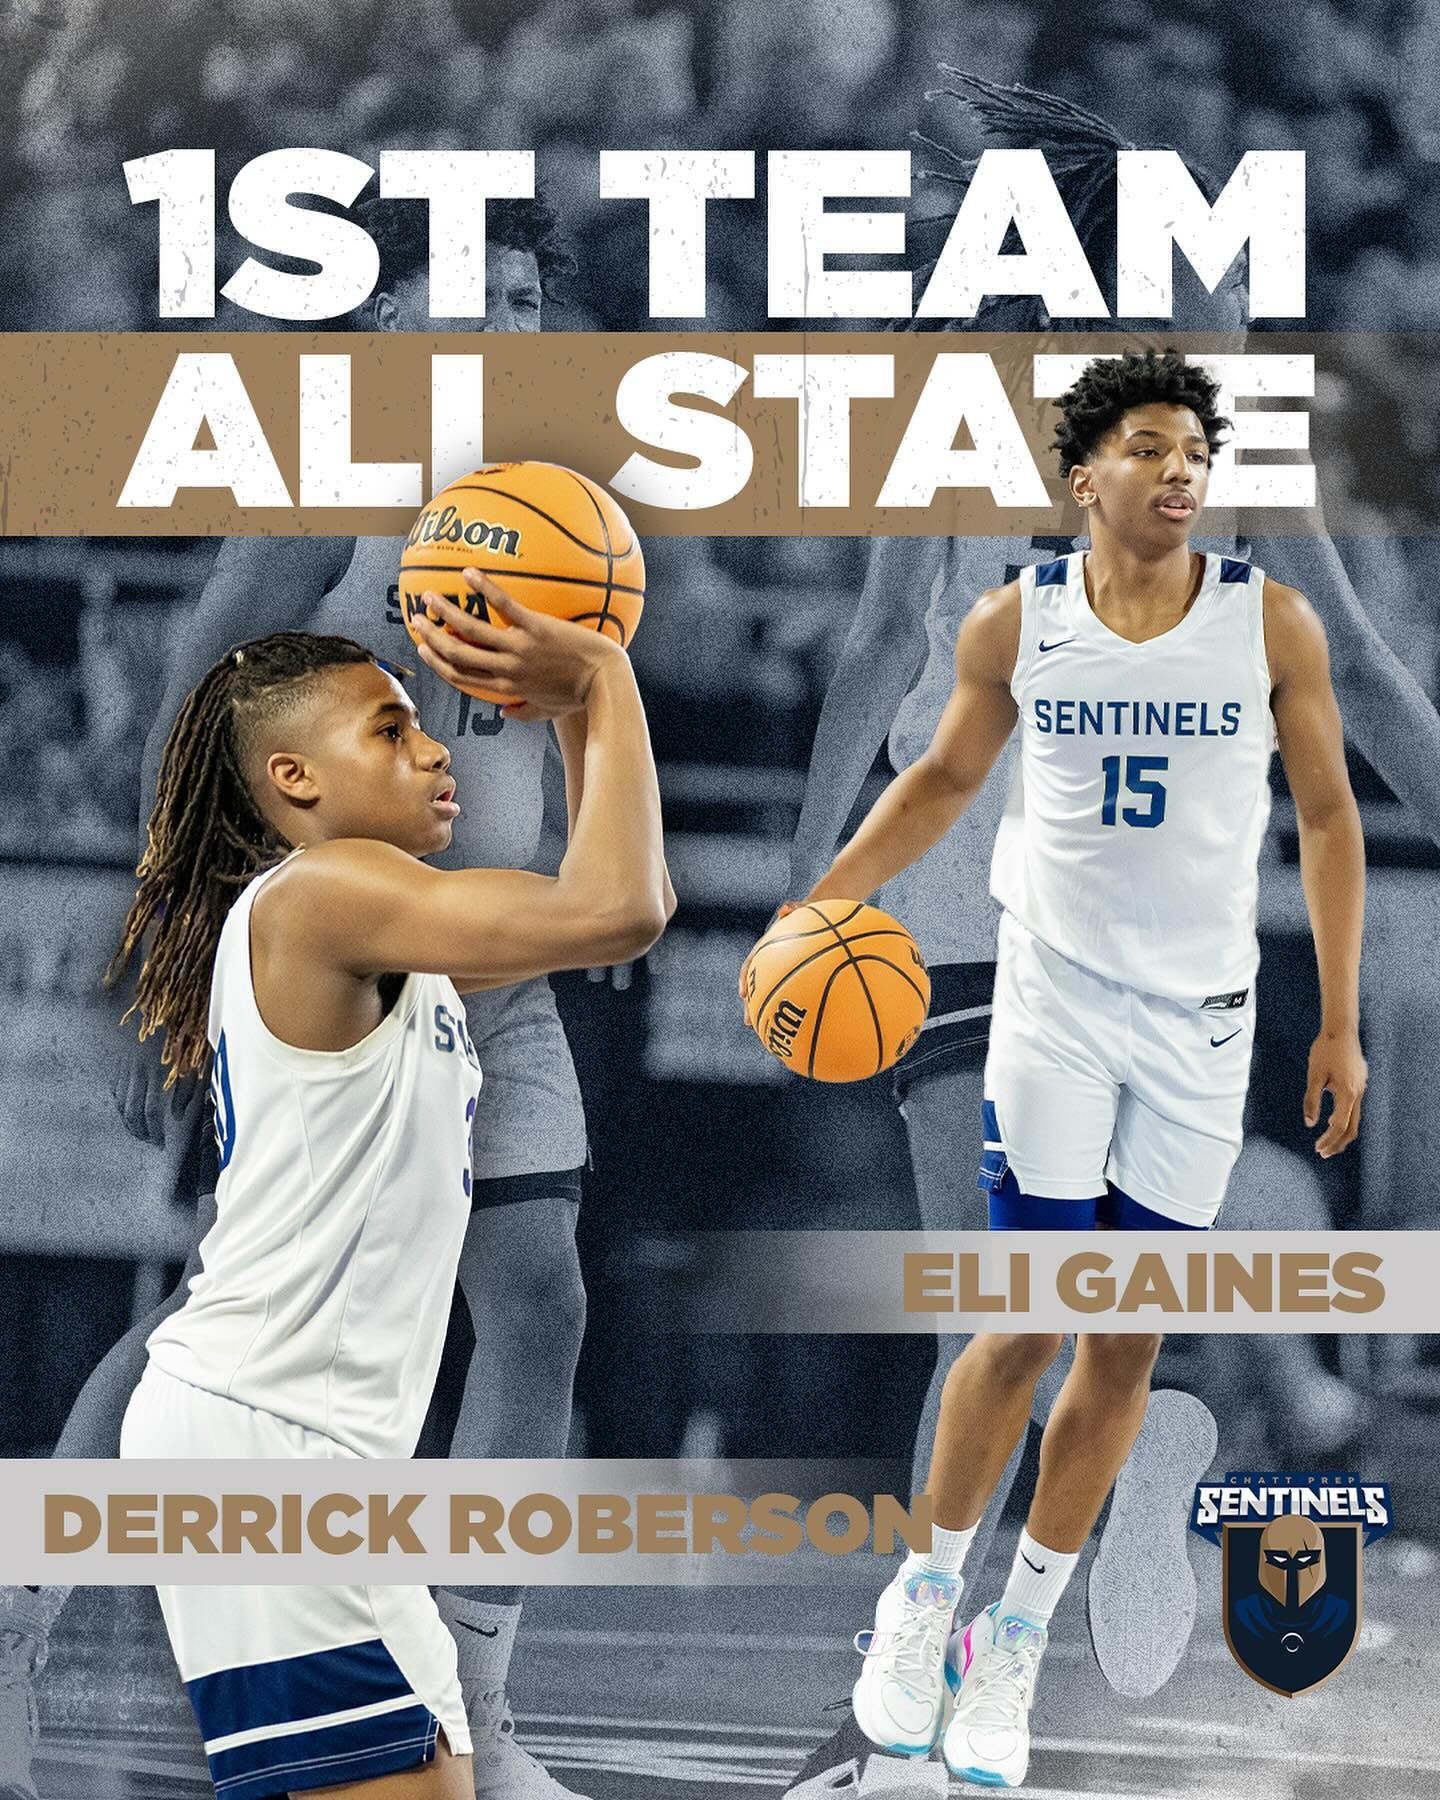 And the accolades continue to pour in! Congrats to athletes Eli Gaines and Derrick Roberson for being recognized as 1st Team All State performers and to @coachmurse42 for being awarded the 2024 Best Of Preps Coach of the Year! Roberson also secured s